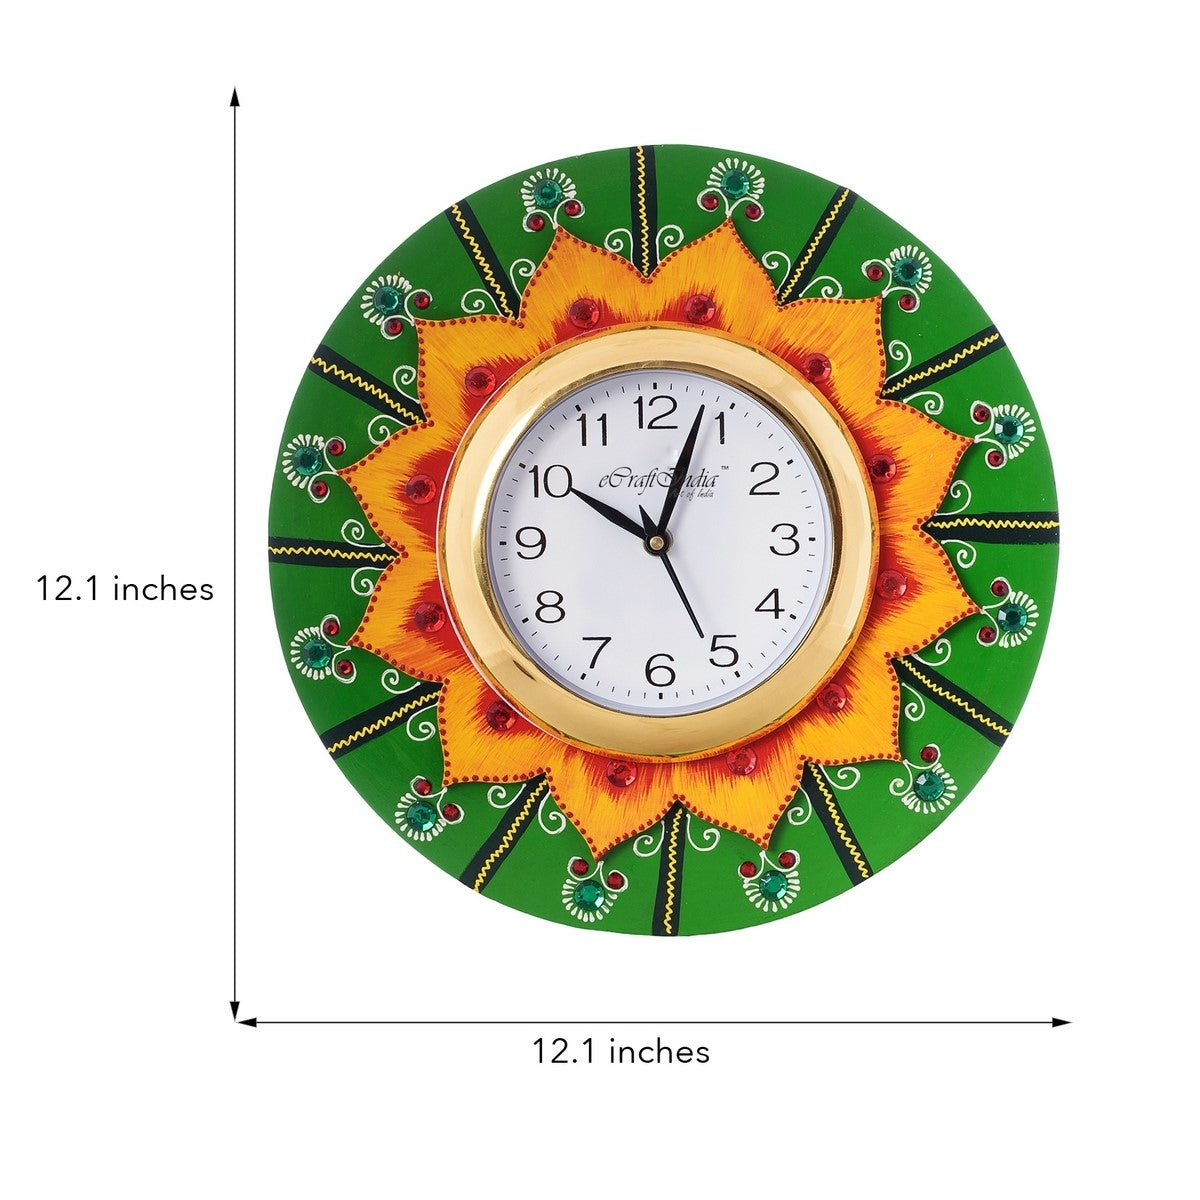 Crystal Studded Floral Shape Wooden Handcrafted Wall Clock 2